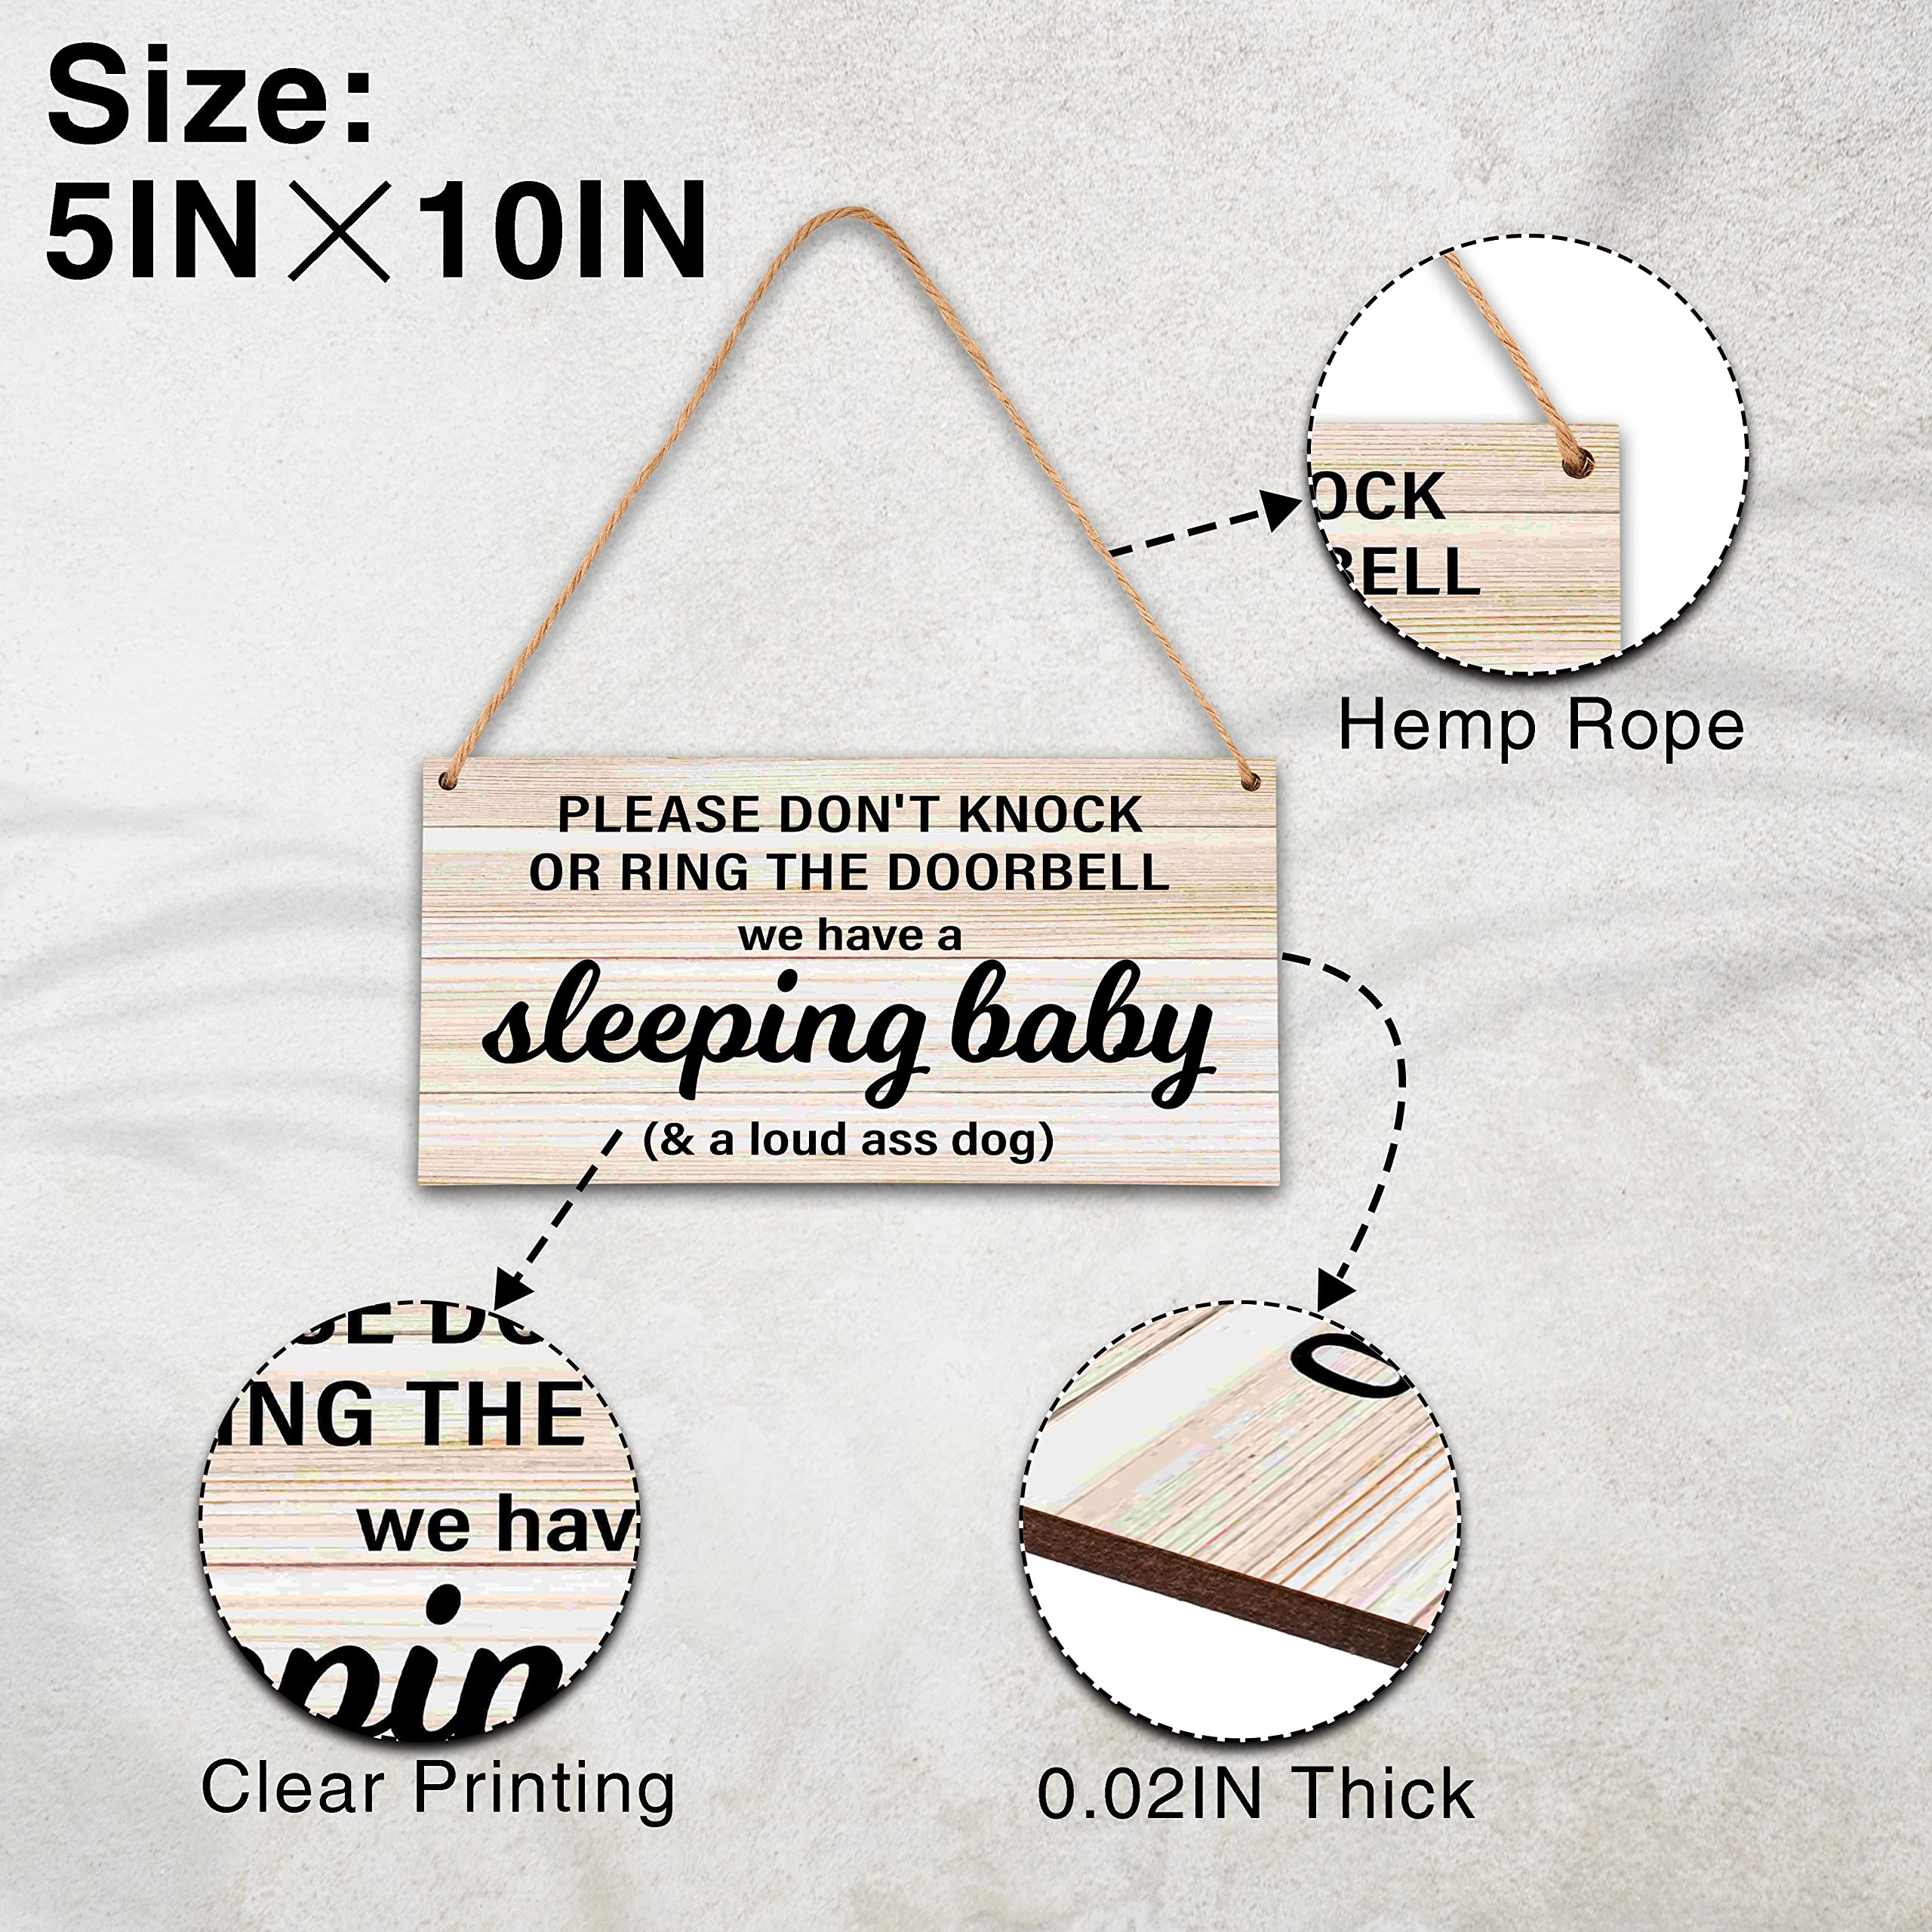 Baby Sleeping Sign For Front Door, Do Not Knock Or Ring Doorbell Wooden Sign, Baby Room Nursery Home Bedroom Rustic Hanging Sign, Set Of 1 Wooden Sign With Rope - B06